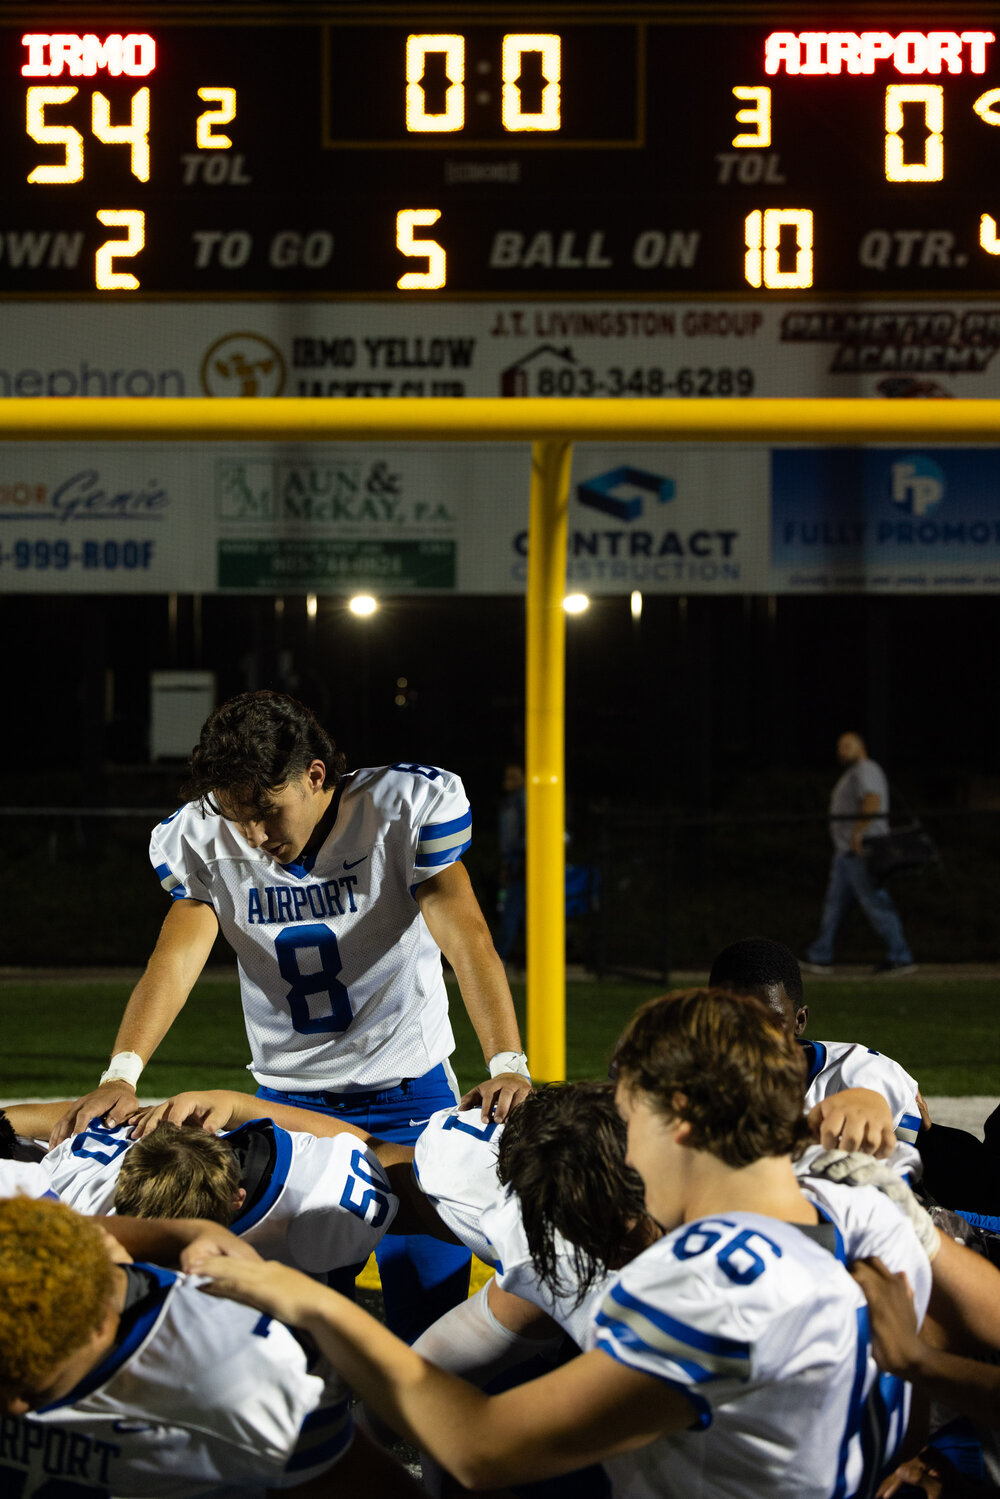 Airport Eagles quarterback Jesse Hoover leads his team in prayer after a difficult loss to the Irmo Yellow Jackets.